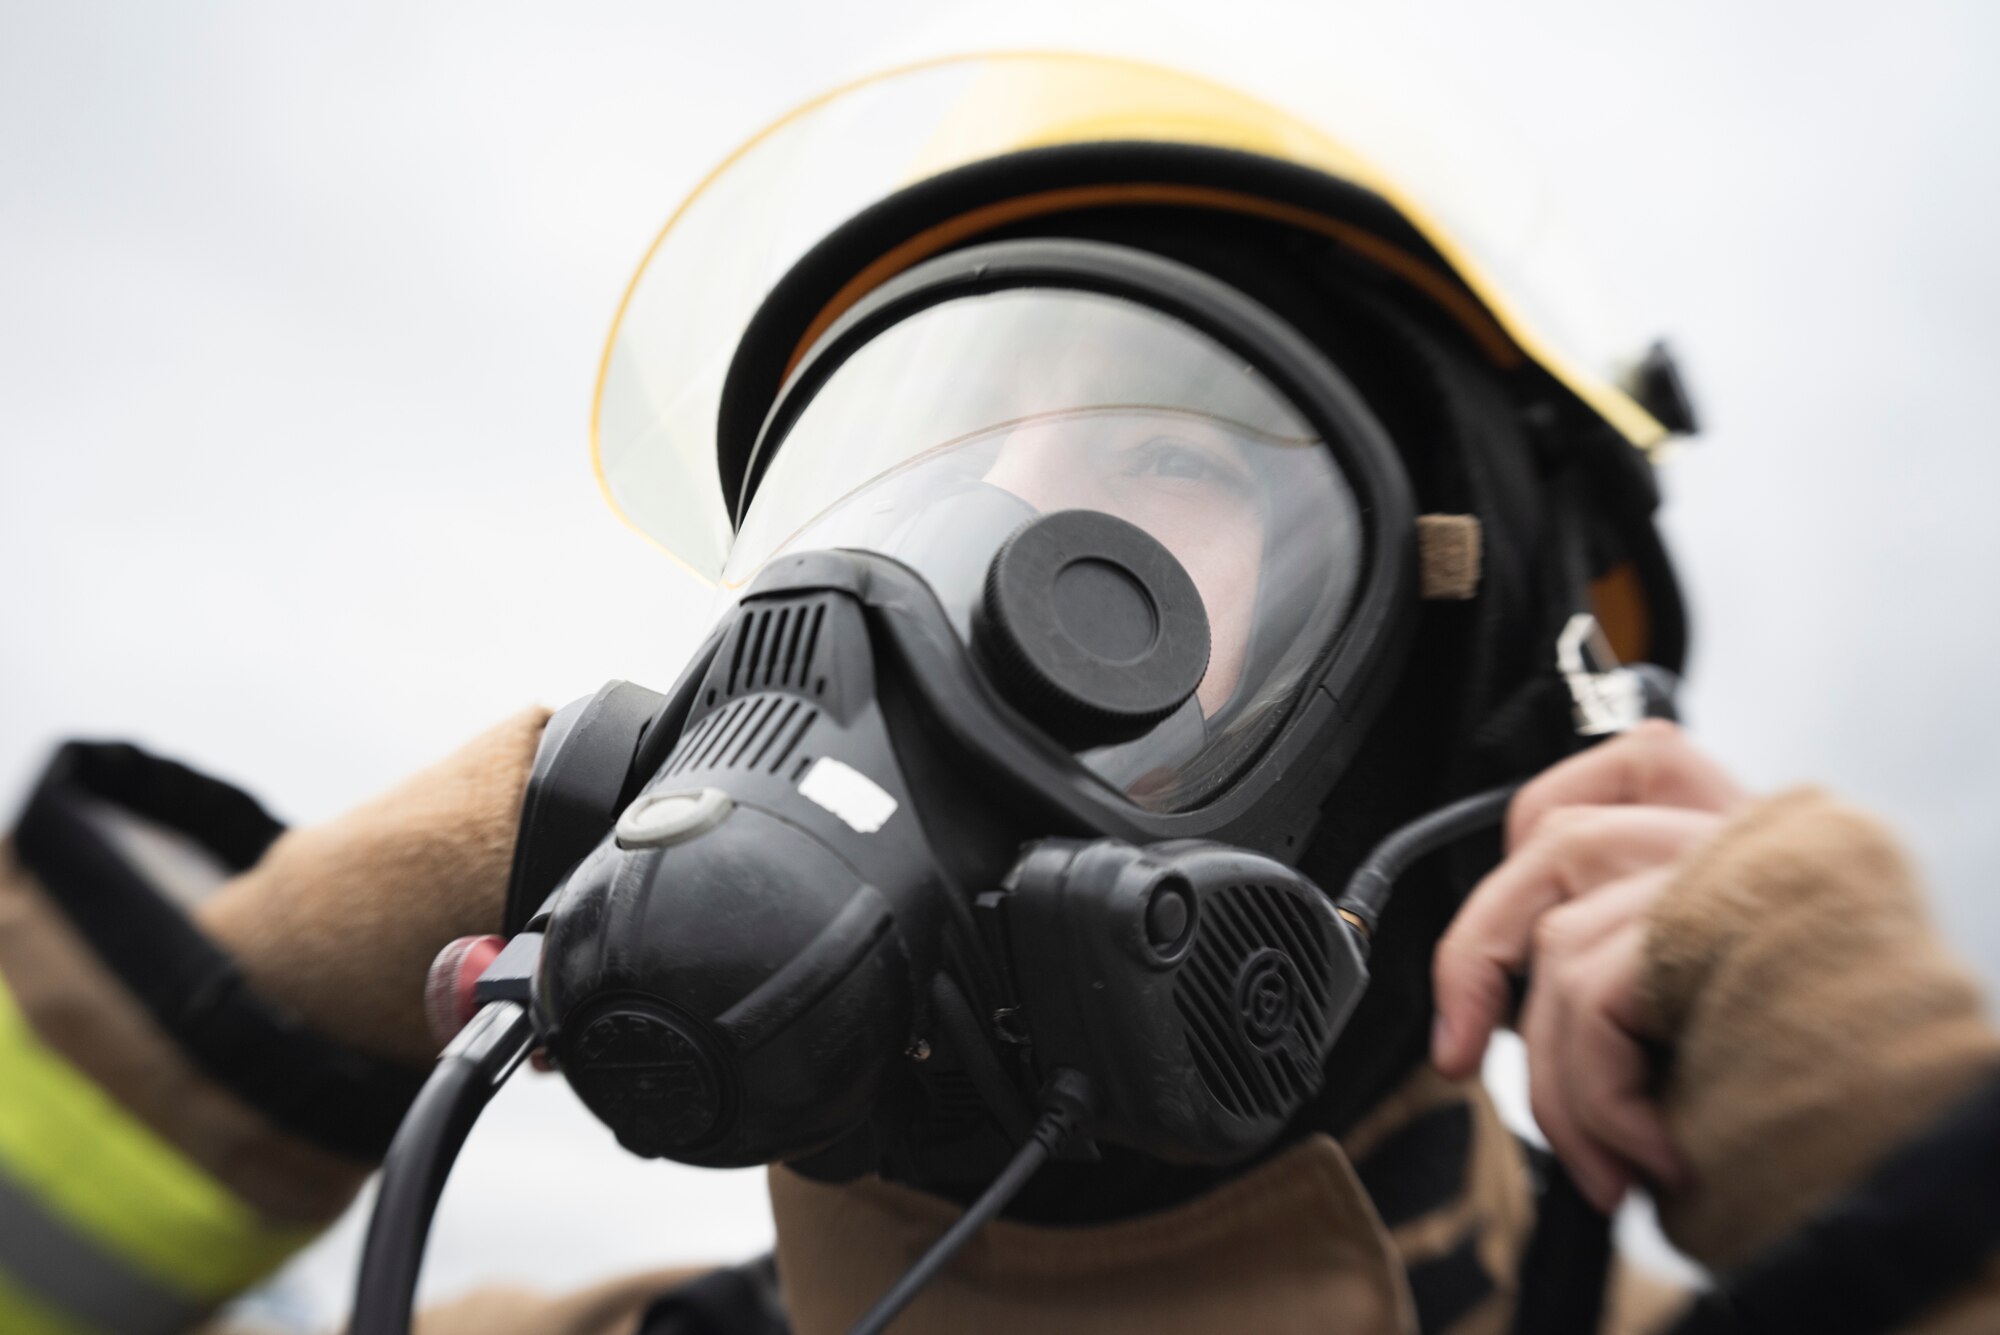 Robert Fisher, 422d Fire Emergency Services firefighter, dons his breathing apparatus prior to beginning airfield firefighting training at RAF Fairford, England, Oct. 23, 2020. This training ensures that firefighters from the 422d Fire Emergency Services are prepared for any potential incidents at the airfield. (U.S. Air Force photo by Tech. Sgt. Aaron Thomasson)